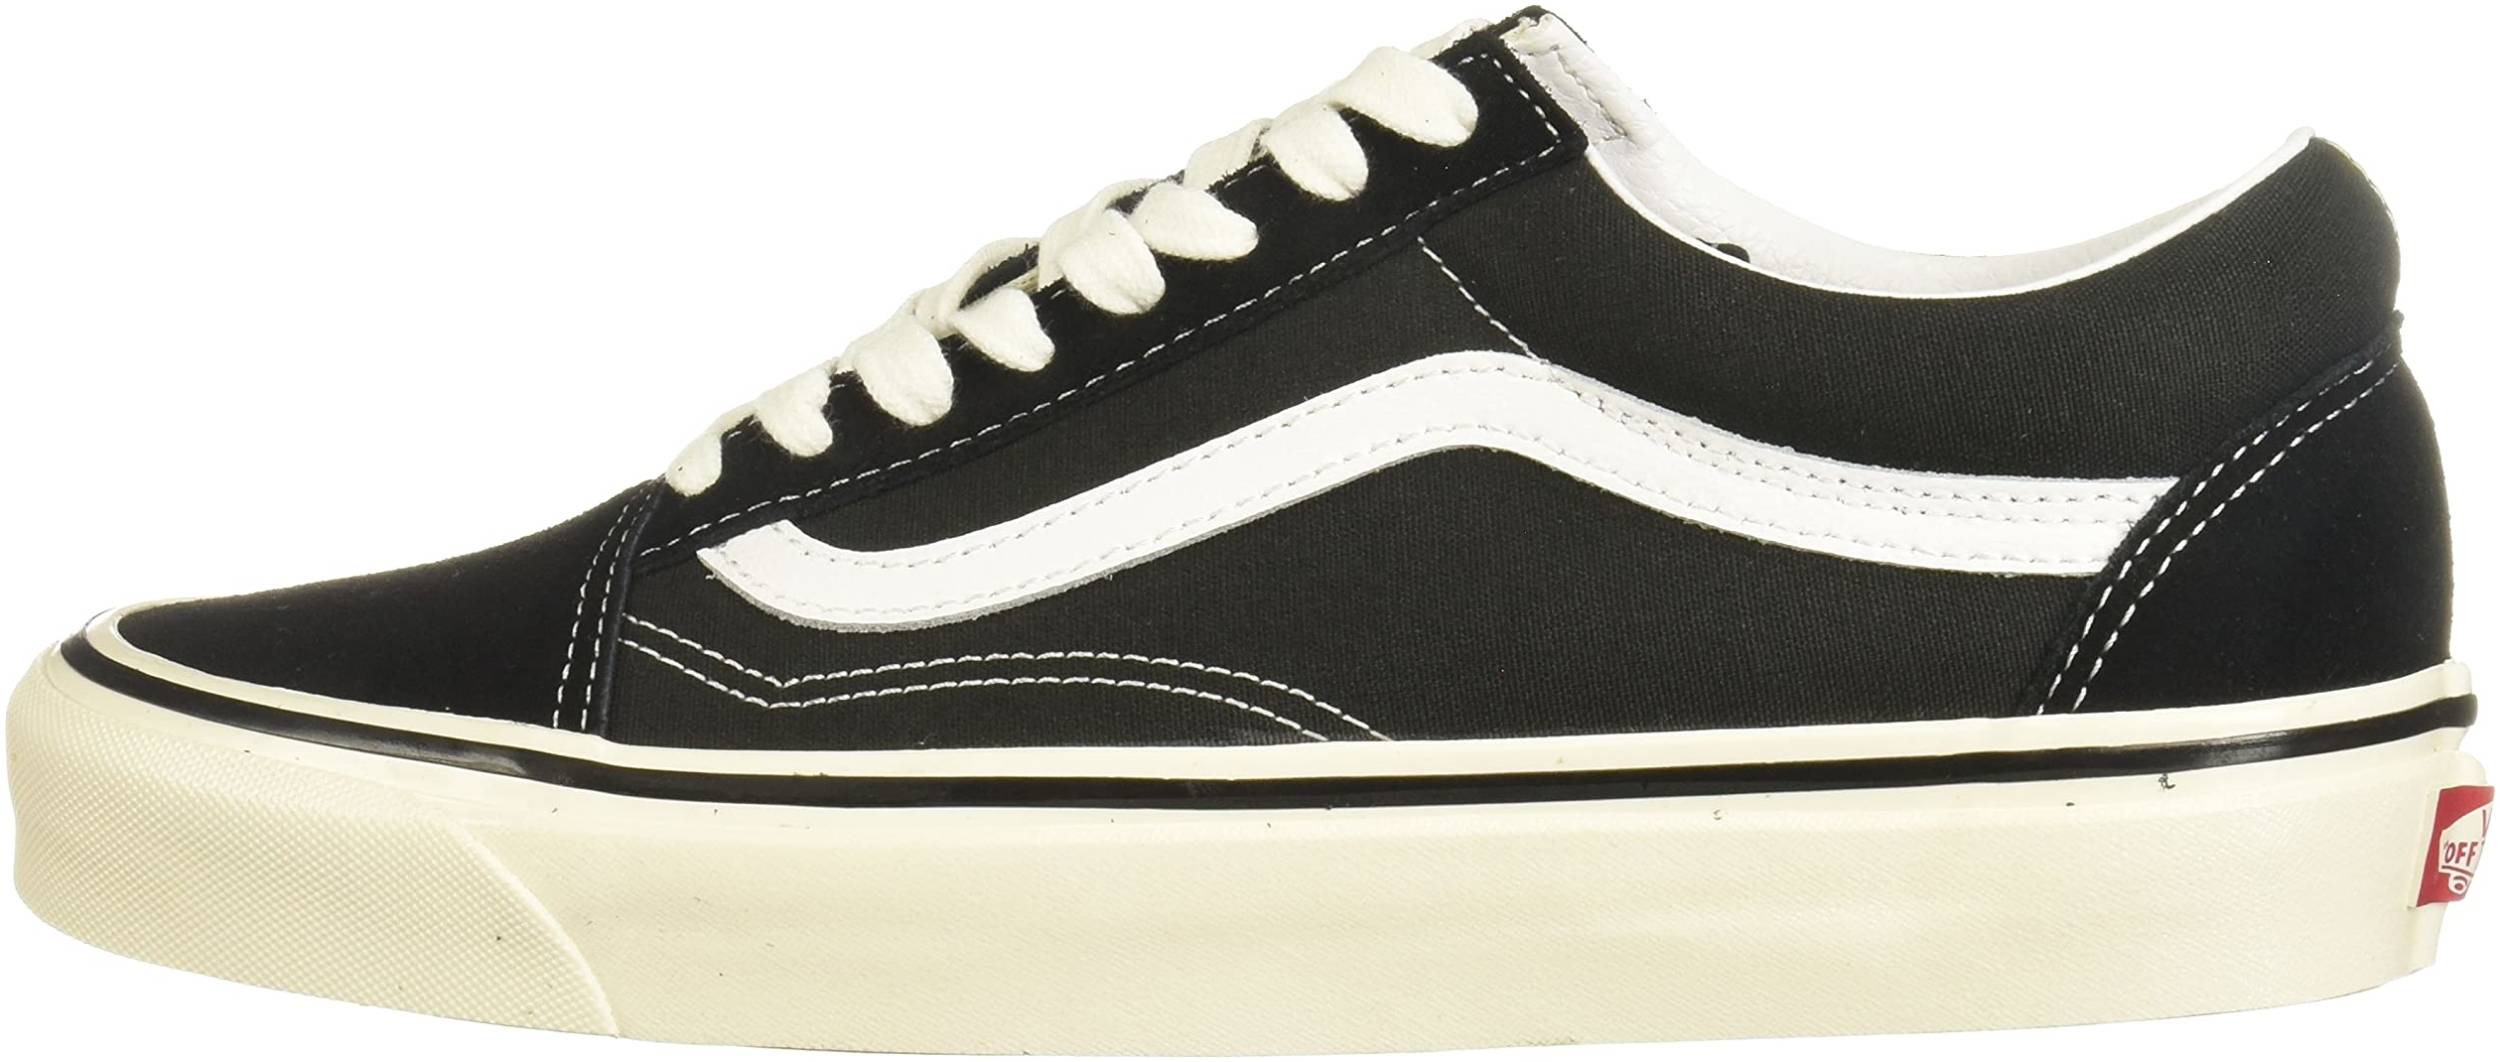 40+ Vans UltraCush sneakers: Save up to 